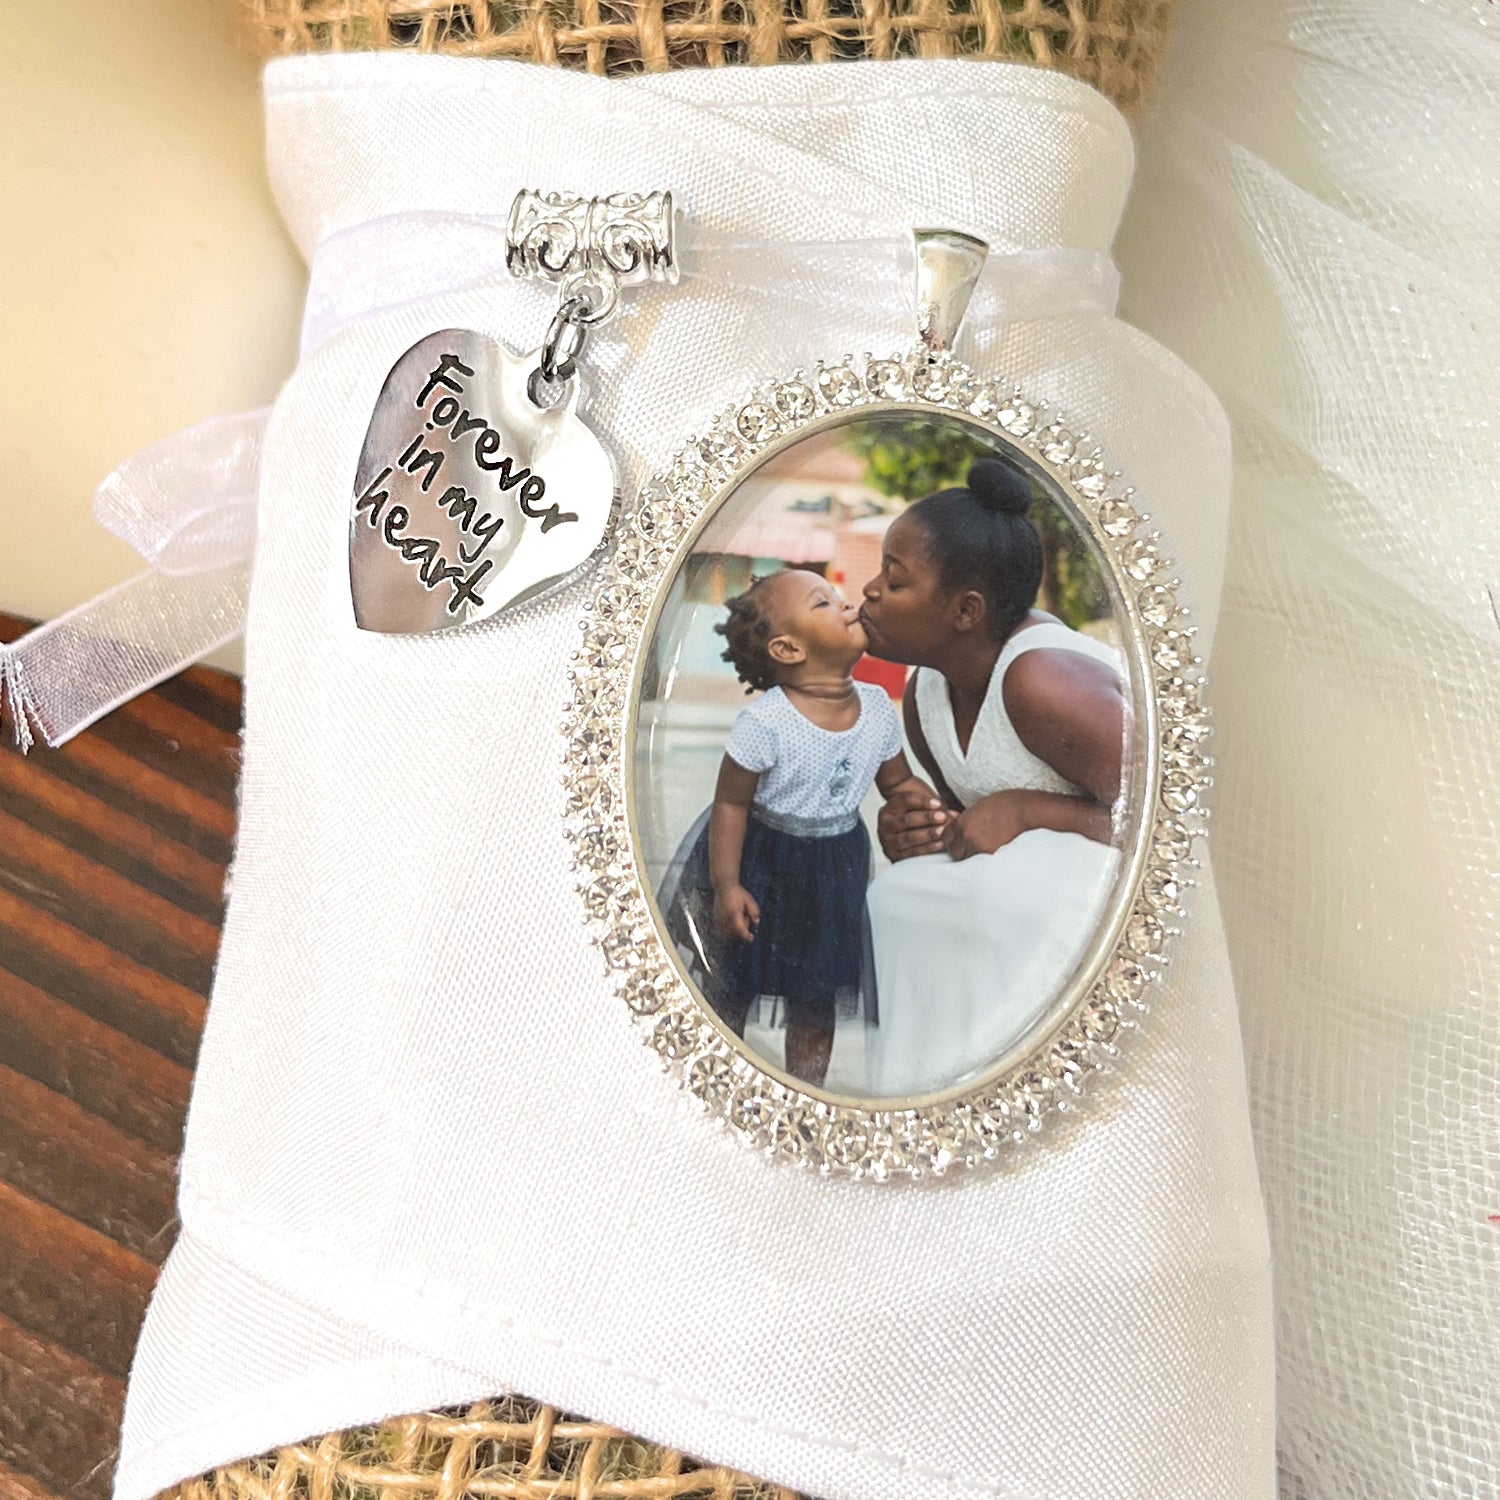 memorial photo charm in oval shape 30x40mm with rhinestones around the edge. Comes with saying charm: Forever in my heart. Attached to a white ribbon for bride to attach to bridal bouquet.